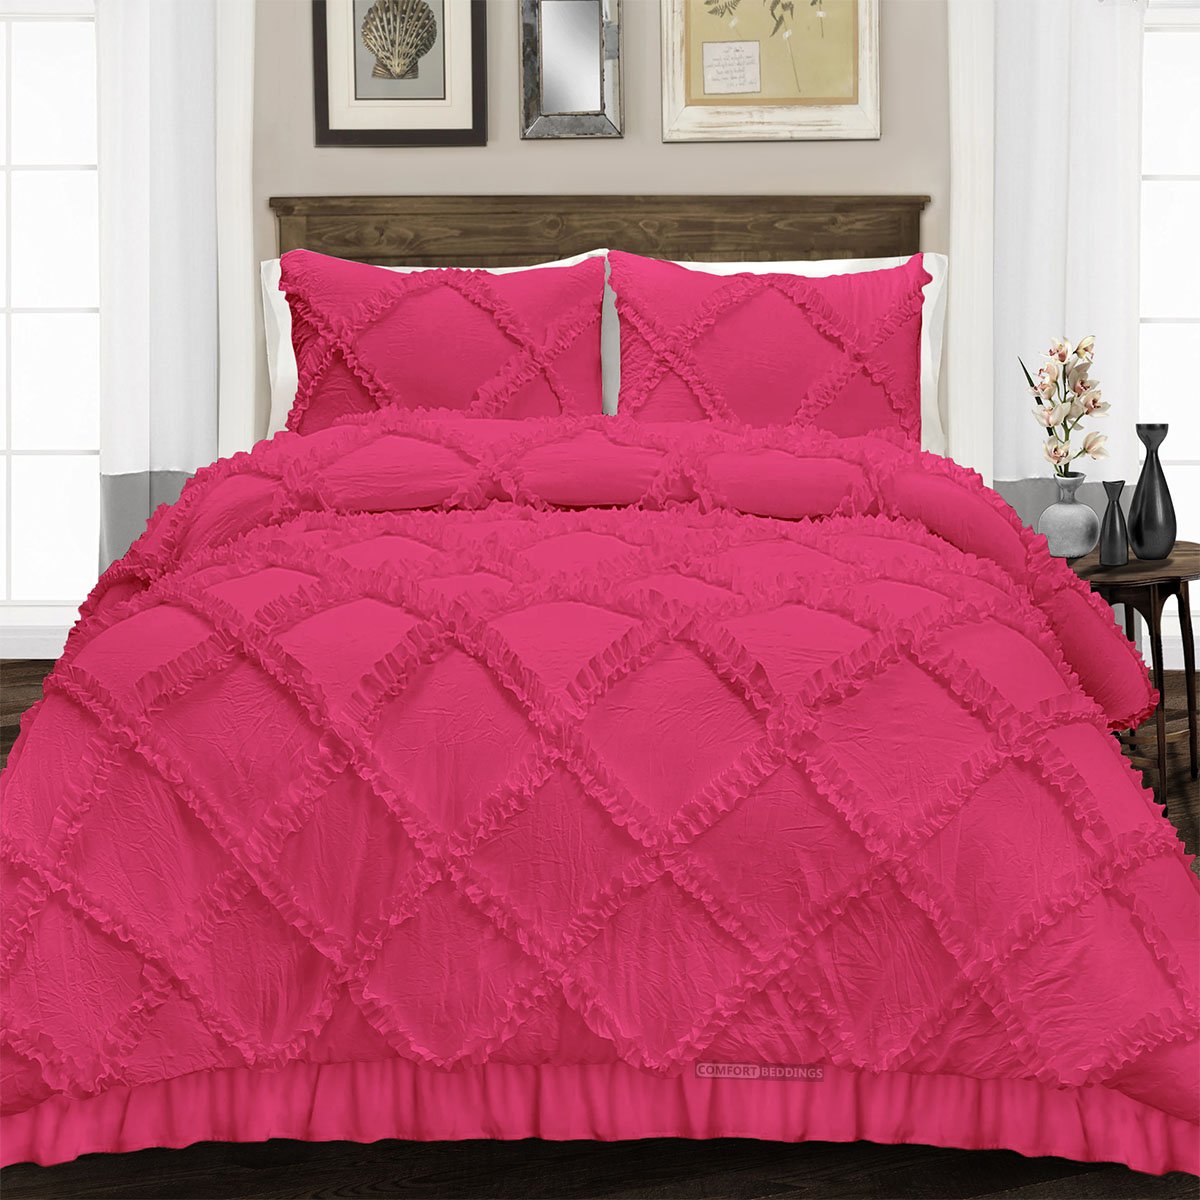 Luxurious Hot Pink diamond ruffled Duvet Cover And Pillowcases